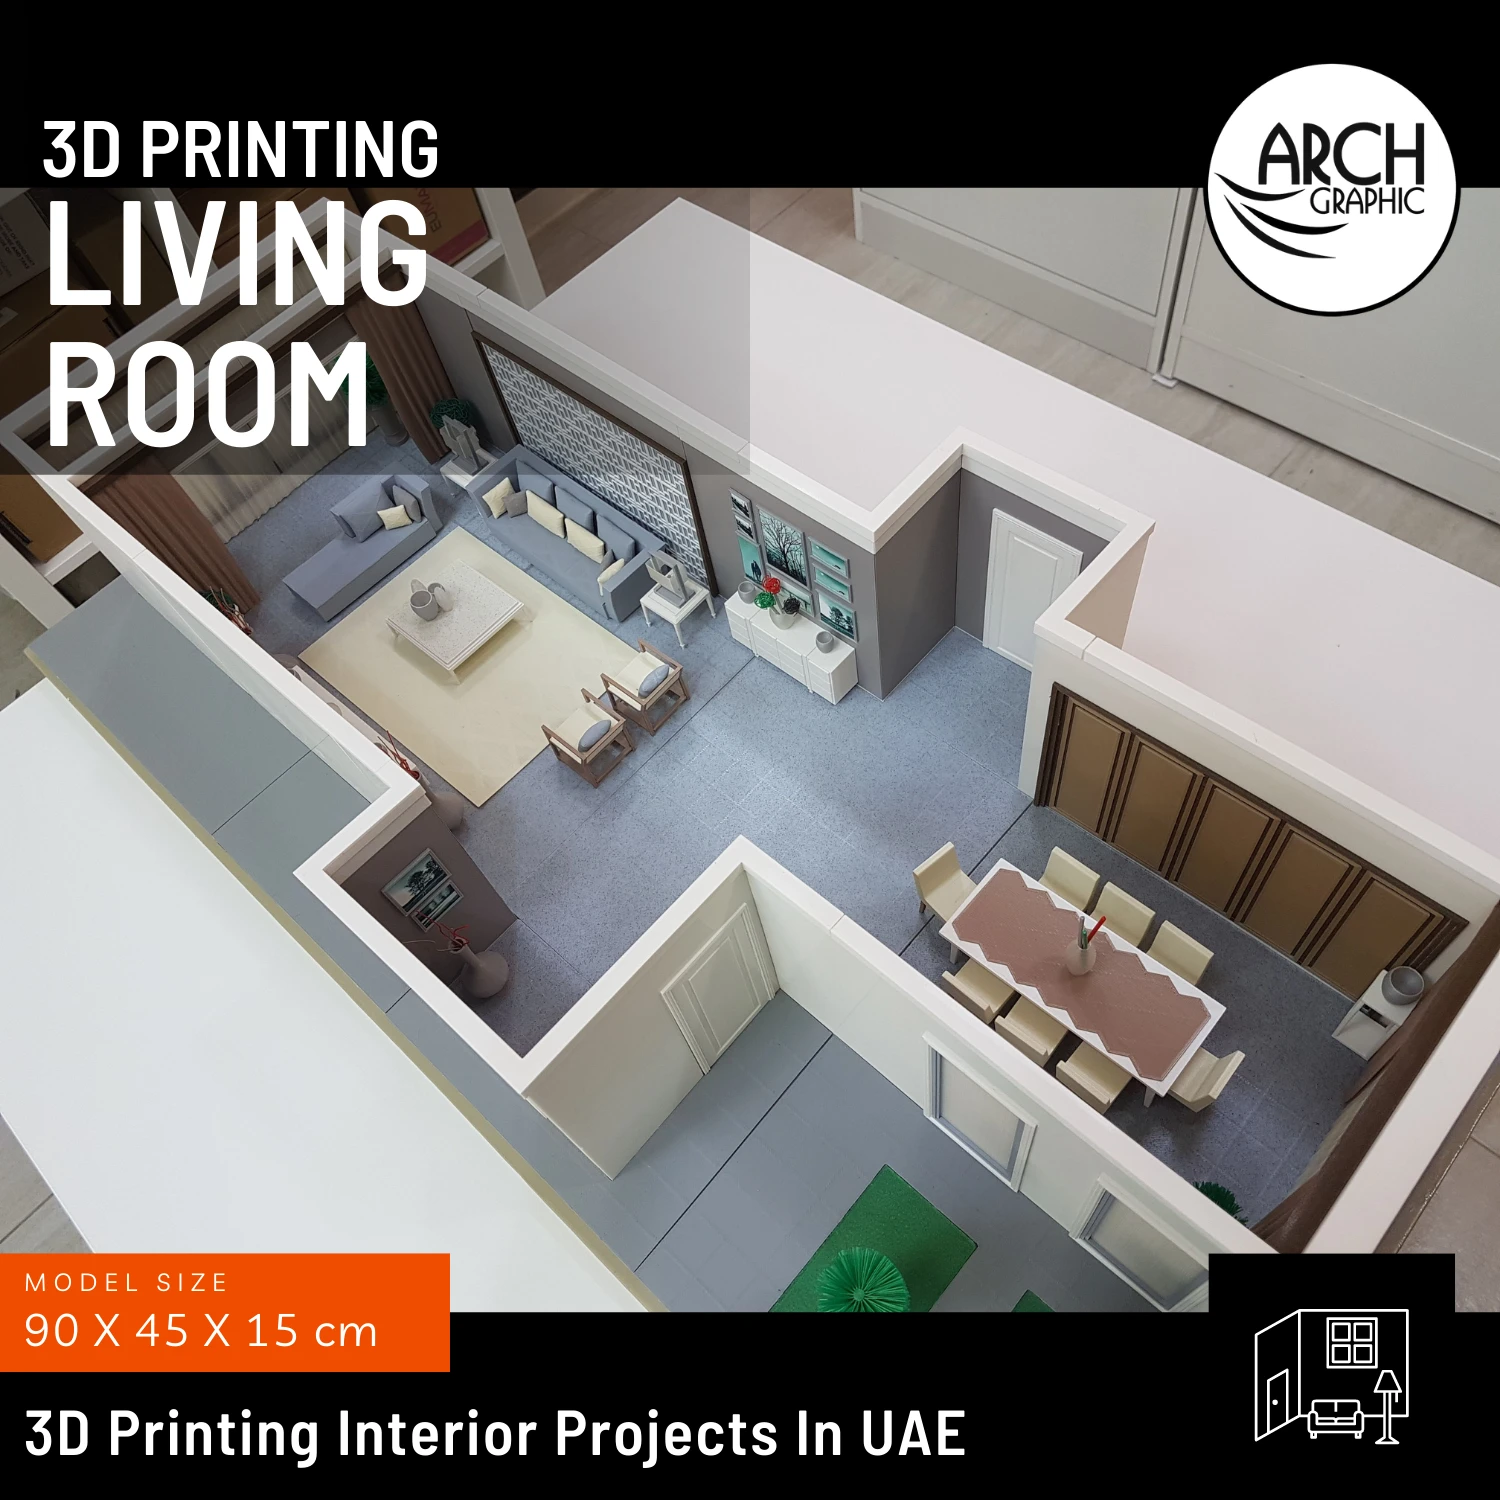 3D printing interior projects in UAE